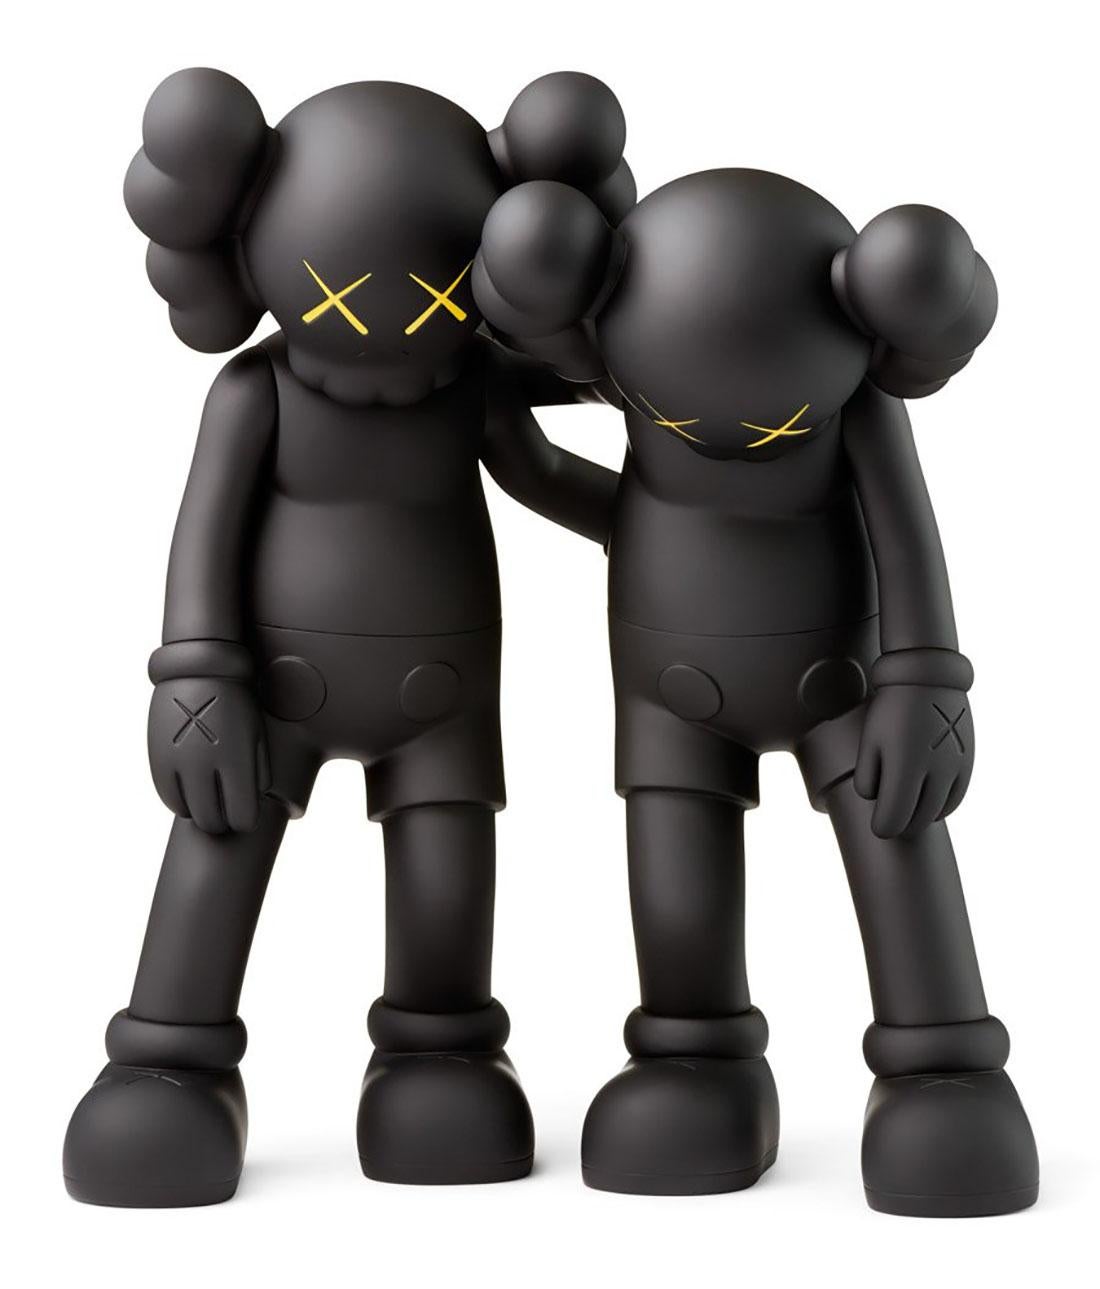 KAWS Along The Way (BLACK). New and unopened in its original packaging. The KAWS Along The Way figurine is a rendition of the artist's 2013 18 foot wood sculpture originally exhibited at Mary Boone gallery NY. 

Medium: Vinyl Paint & Cast Resin